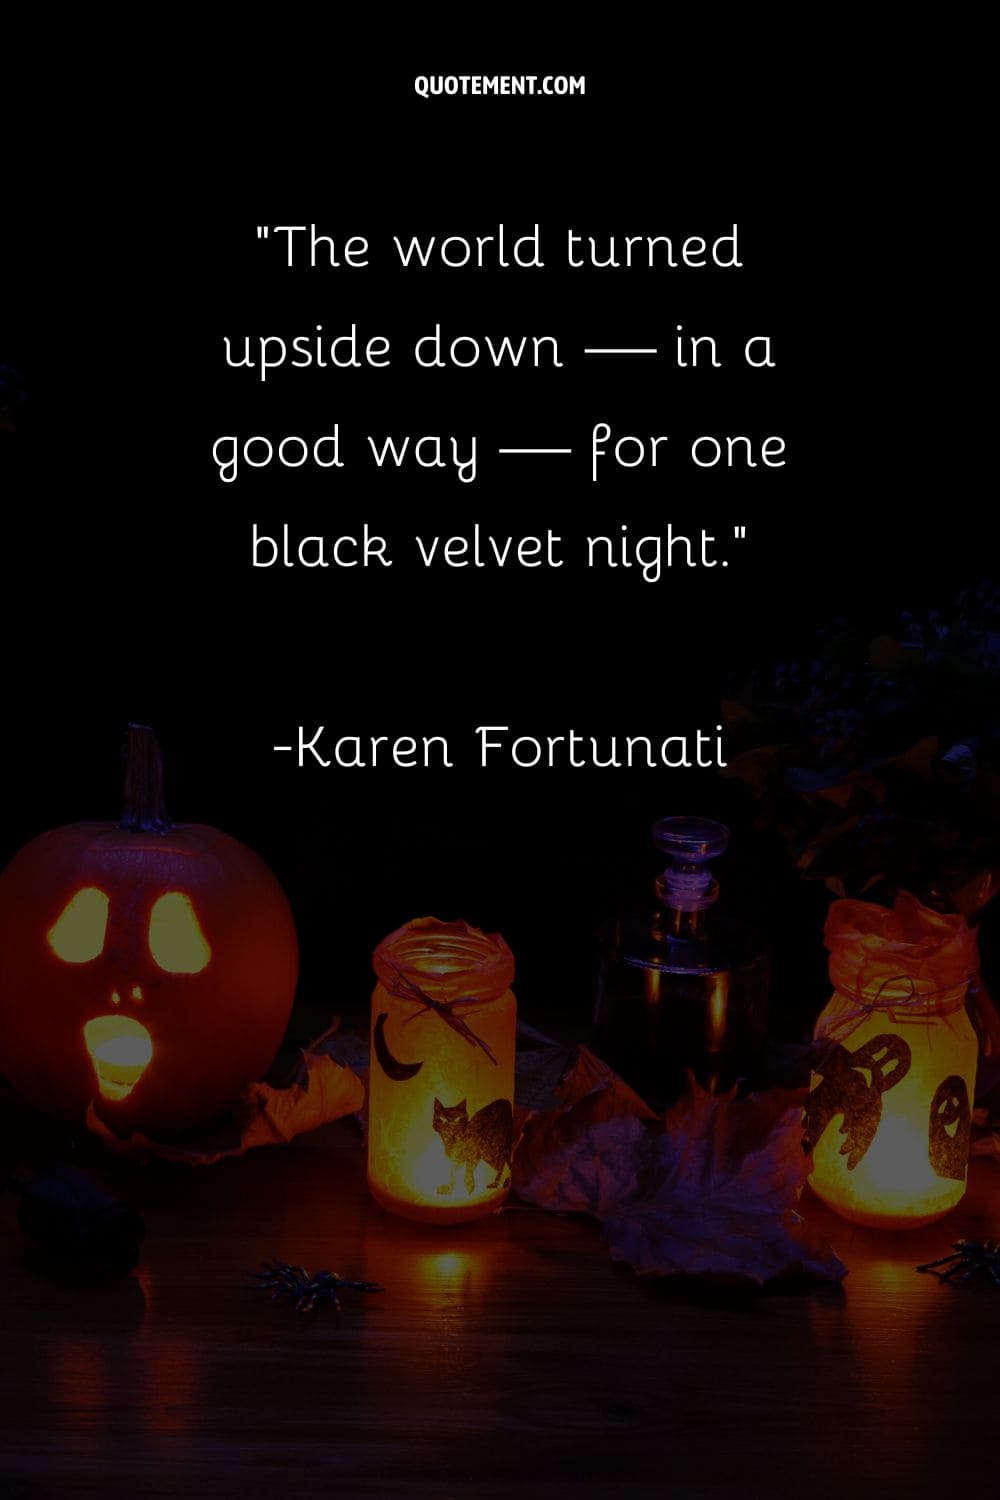 The world turned upside down — in a good way — for one black velvet night